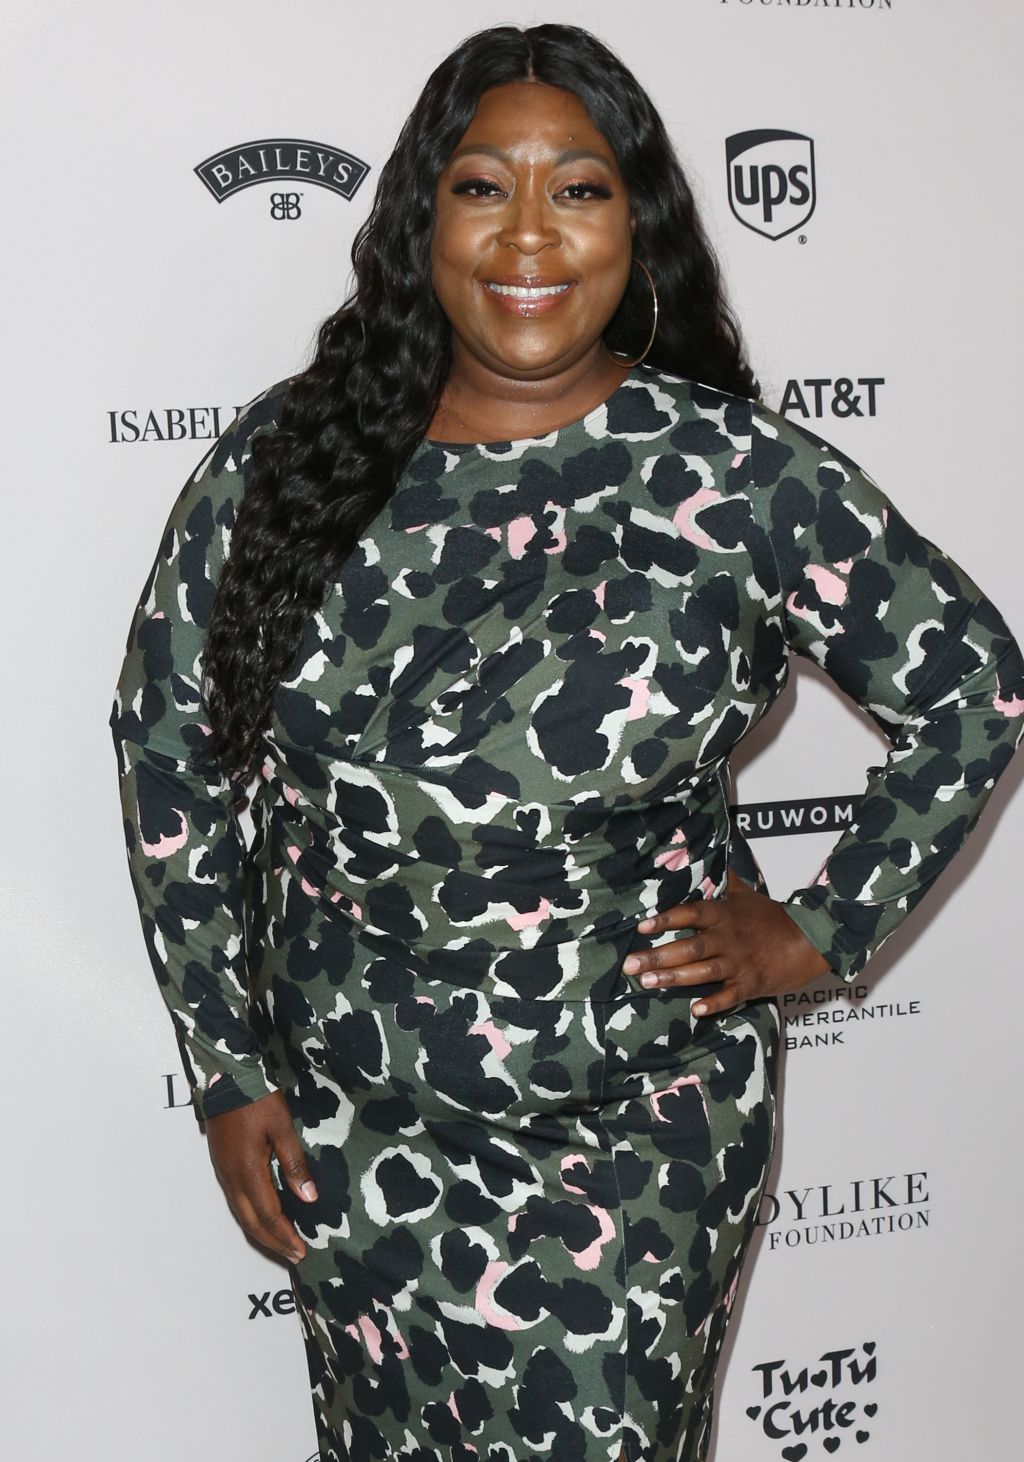 Ladylike Foundation's 2018 Annual Women Of Excellence Scholarship Luncheon - Arrivals